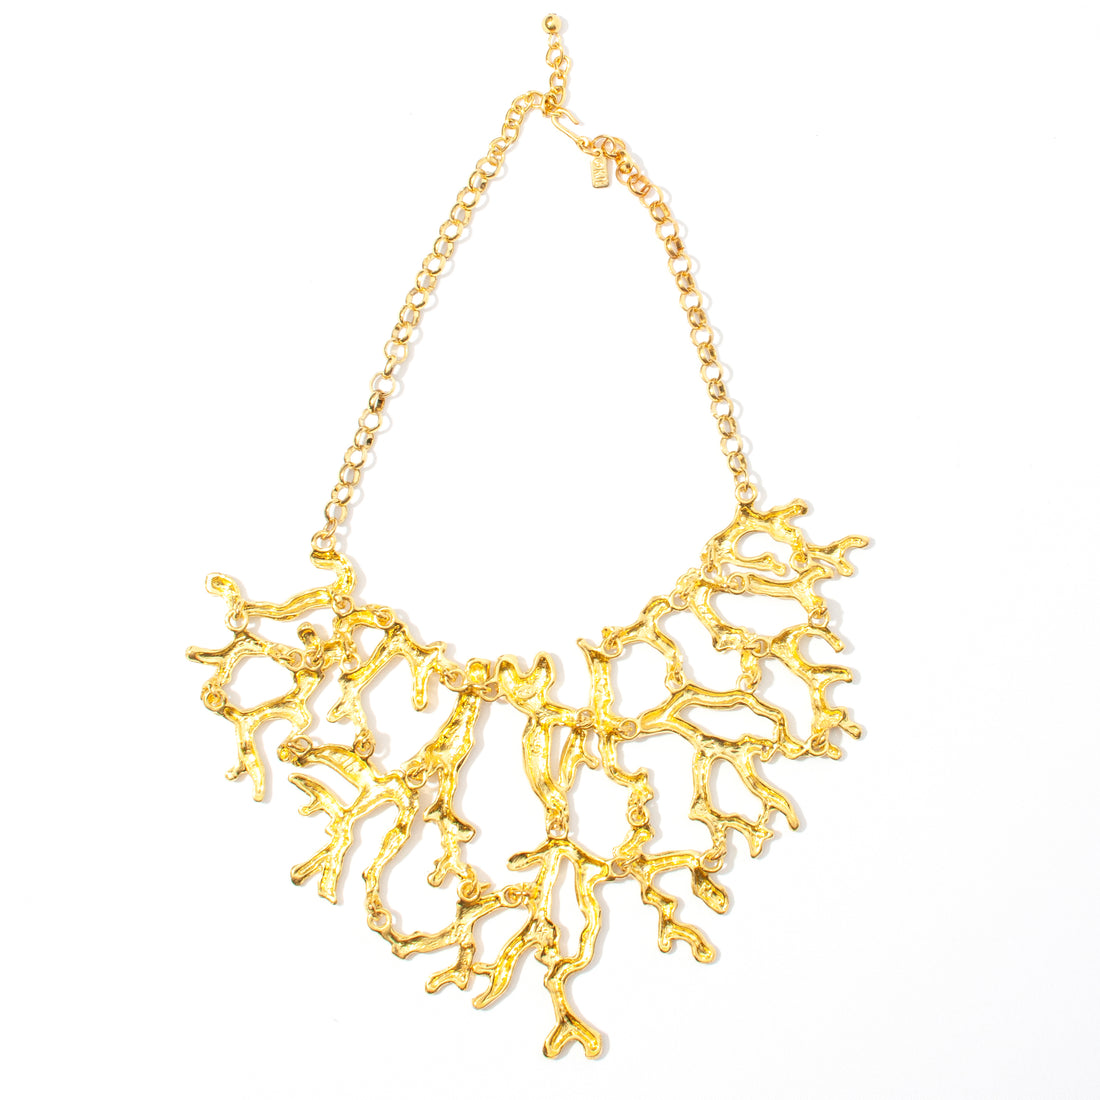 KENNETH JAY LANE CORAL REEF STATEMENT NECKLACE